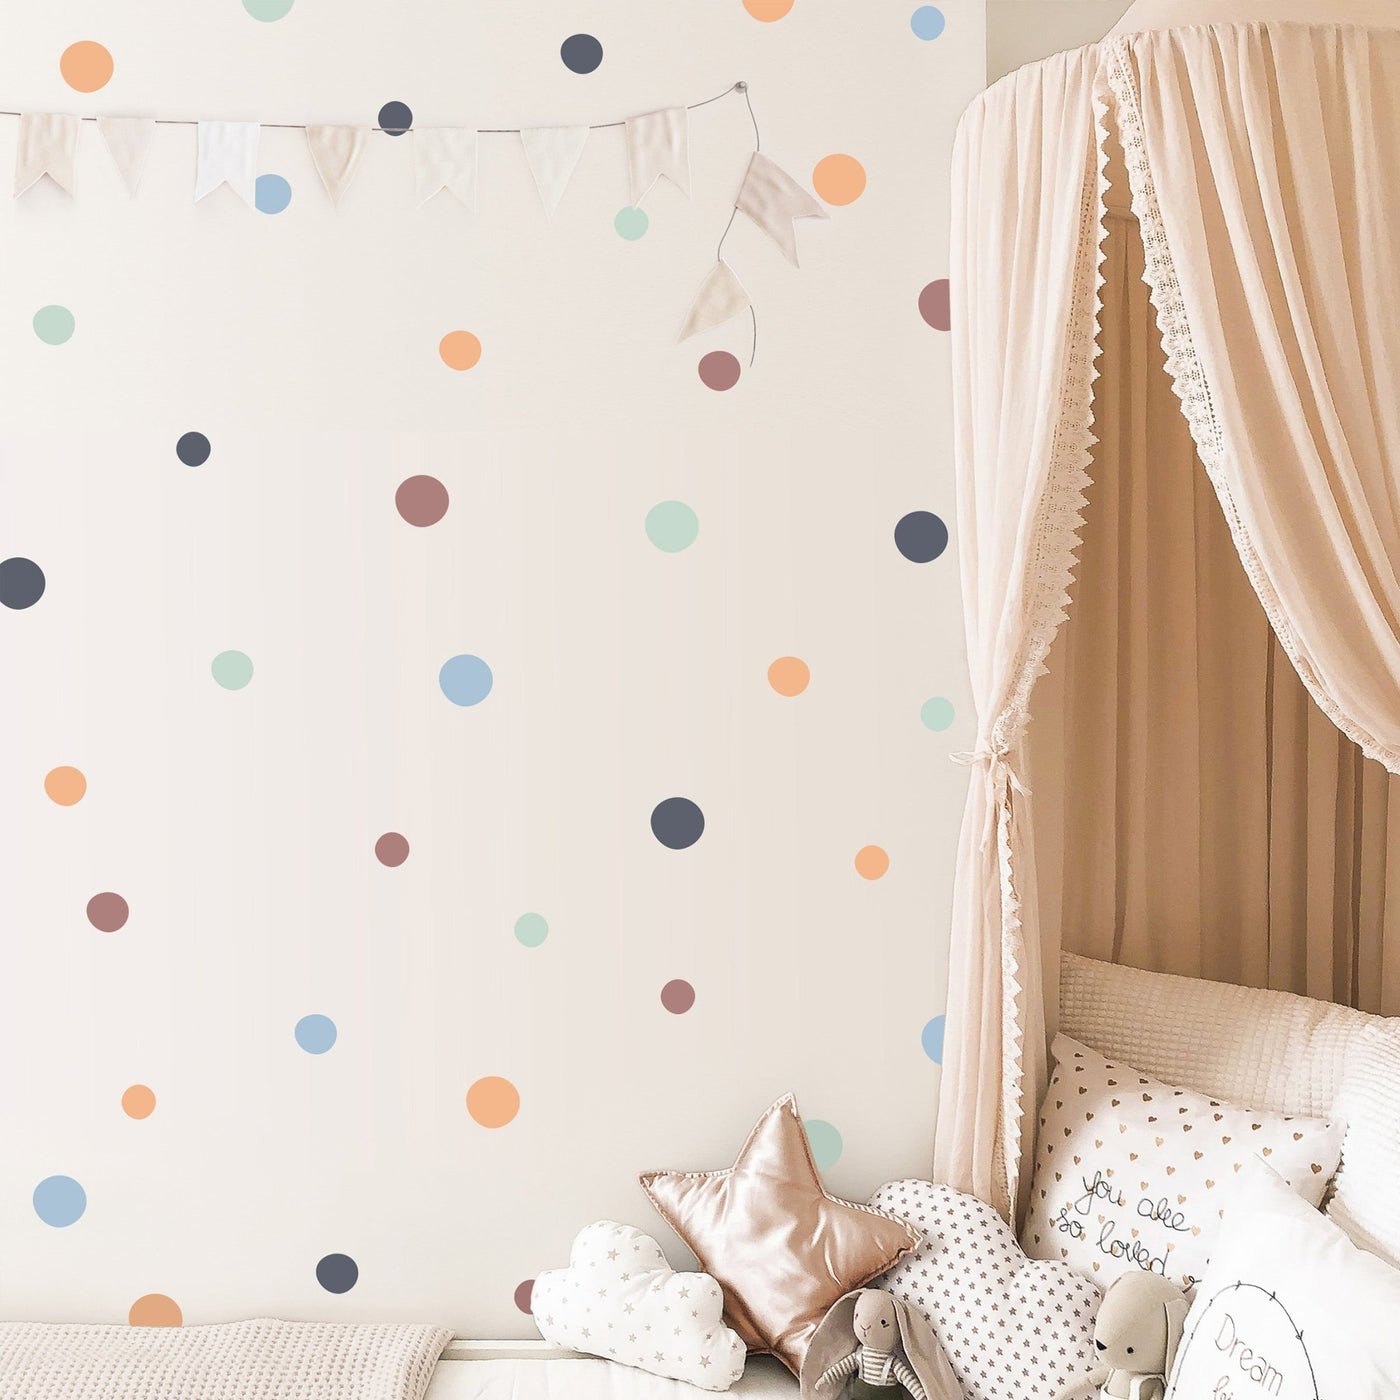 Warm and Earthy Irregular Shape Polka Dots Wall Stickers Colour Combo 1 - Jack Harry and Ollie